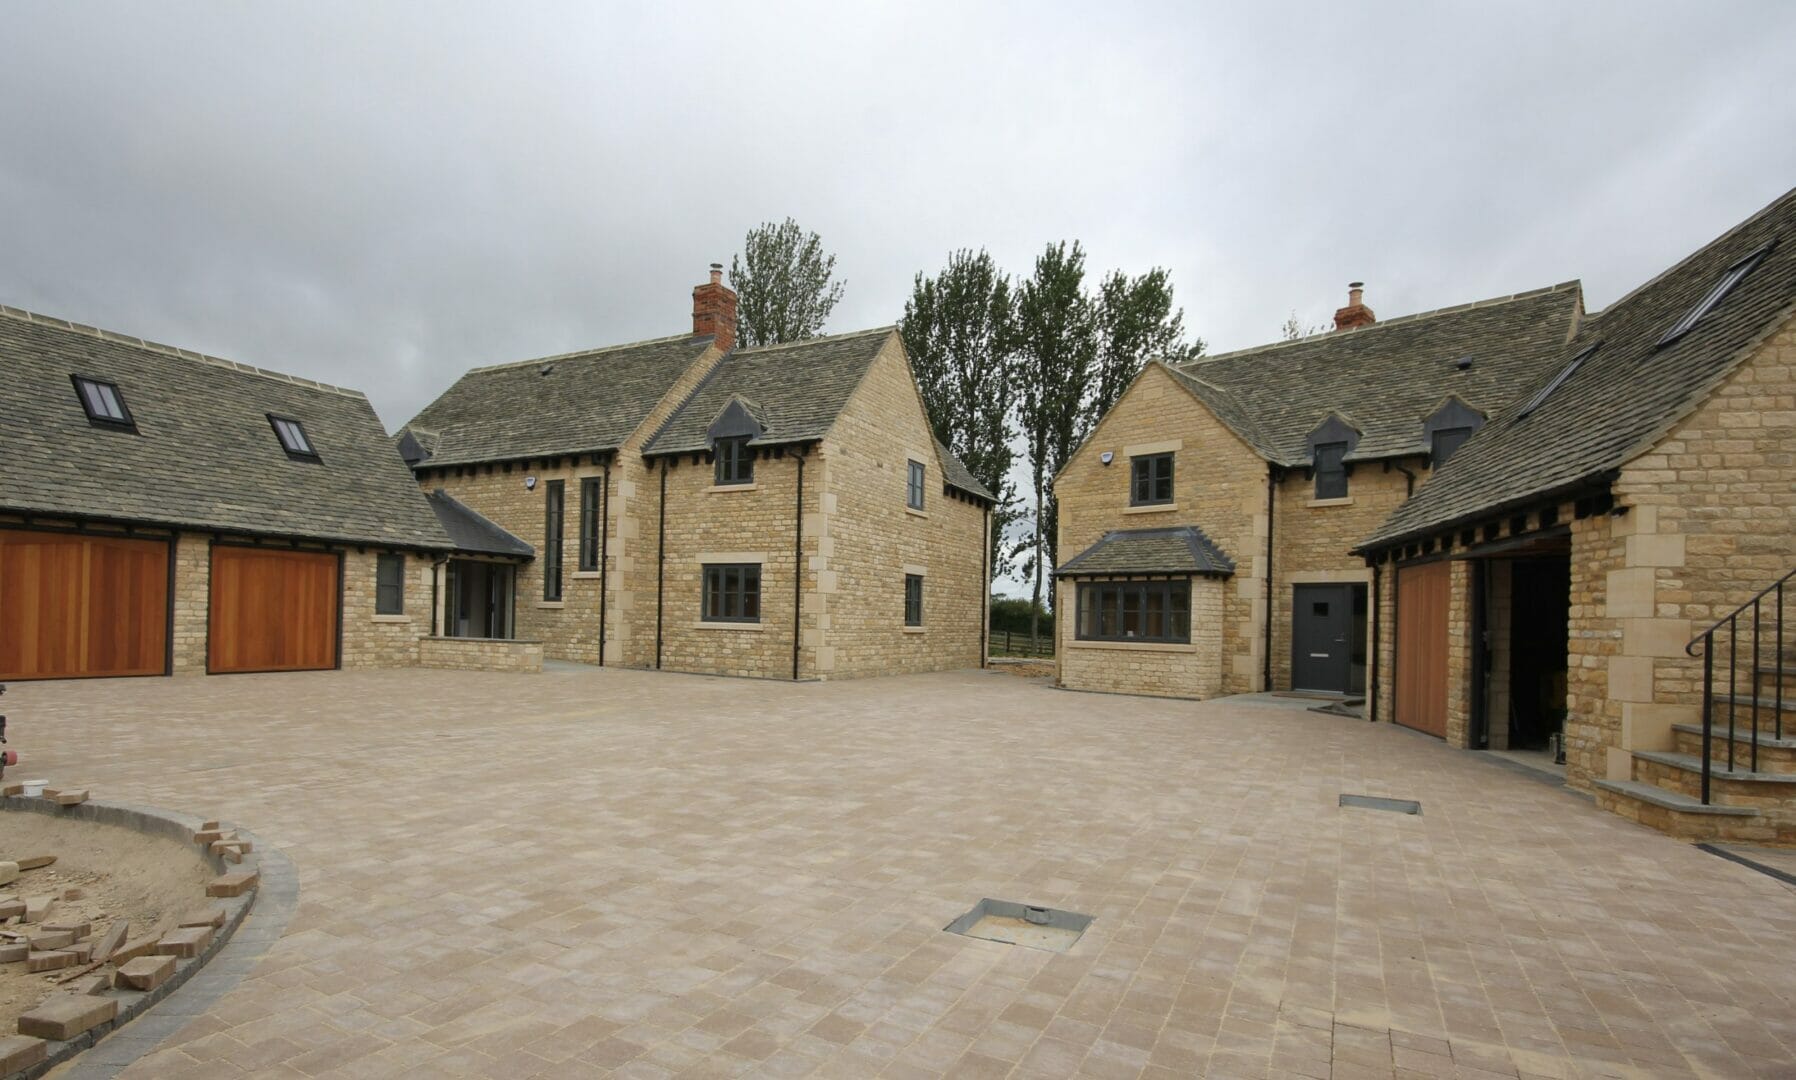 OMNIE’S MVHR SYSTEMS AT HEART OF SUSTAINABLE COTSWOLD DEVELOPMENT @omnieuk